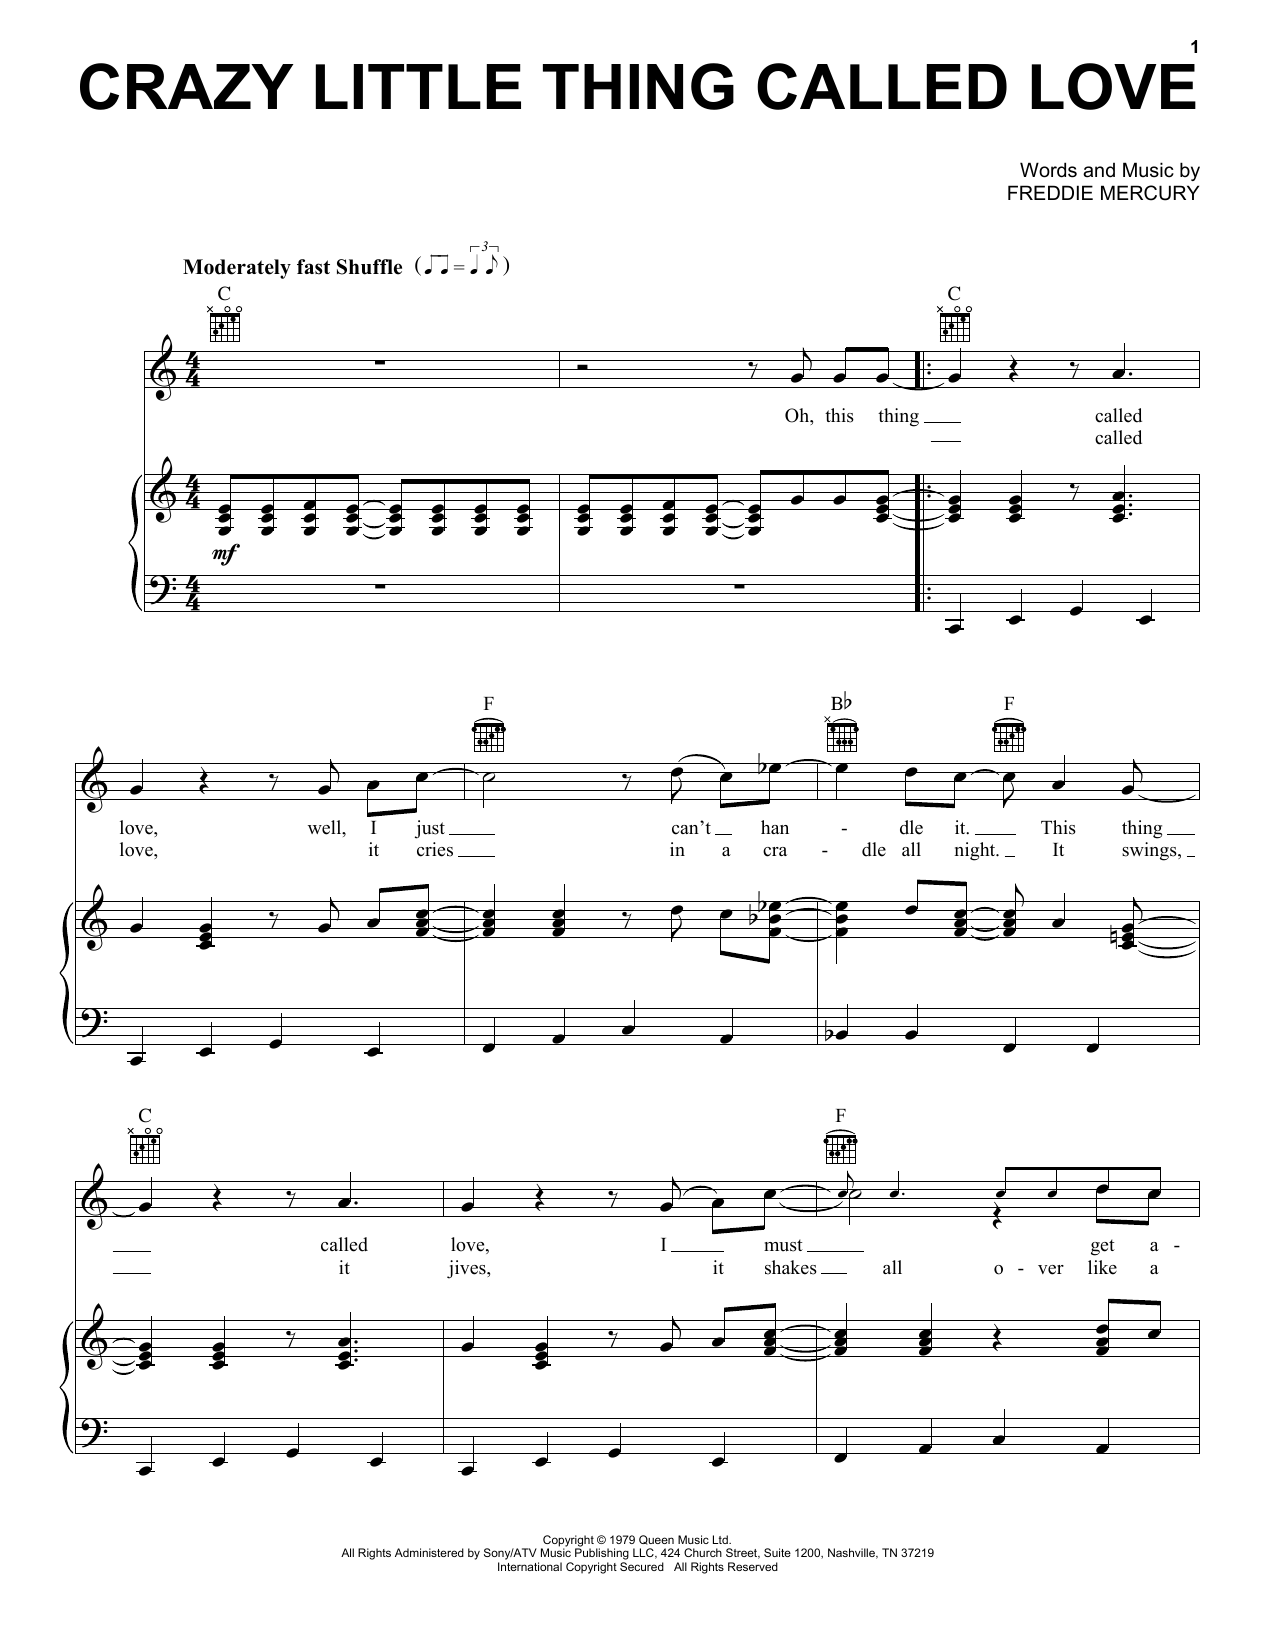 Queen Crazy Little Thing Called Love sheet music preview music notes and score for Piano, Vocal & Guitar including 6 page(s)